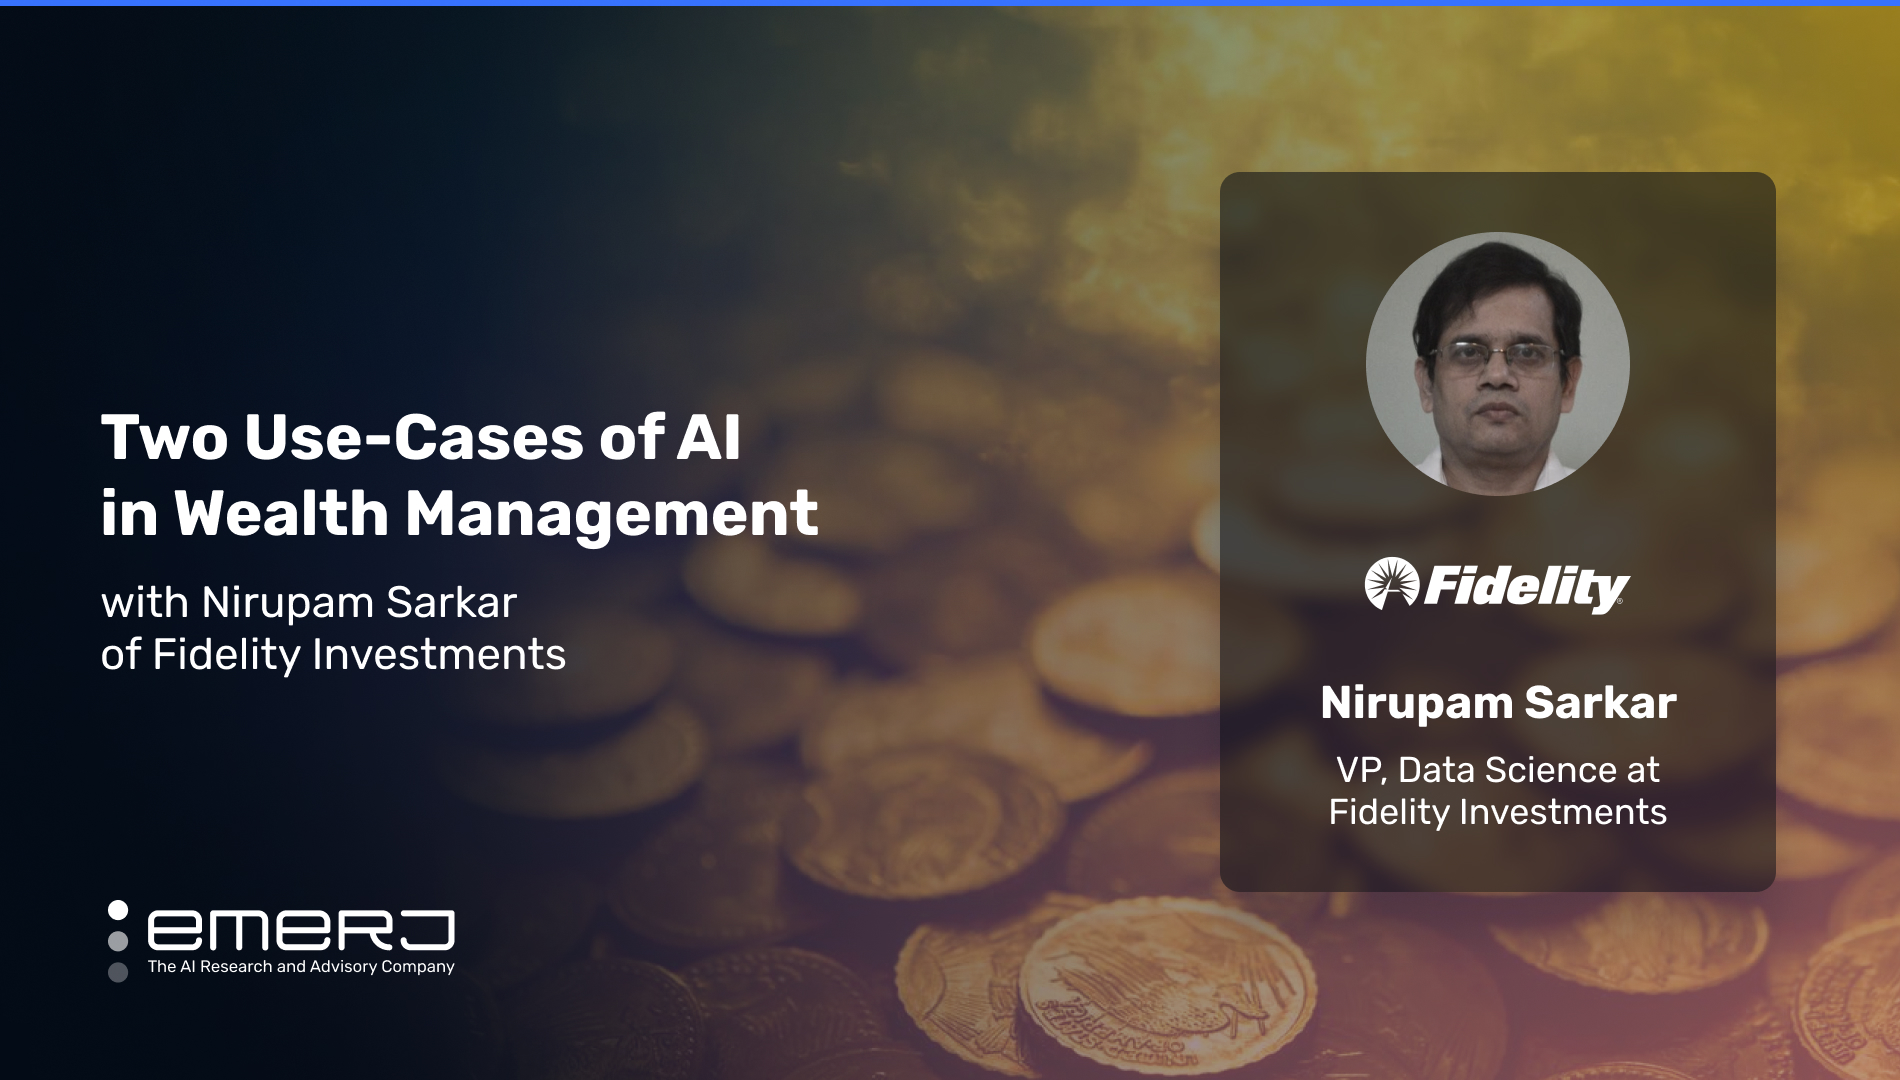 Two Use-Cases of AI in Wealth Management – with Nirupam Sarkar of Fidelity Investments